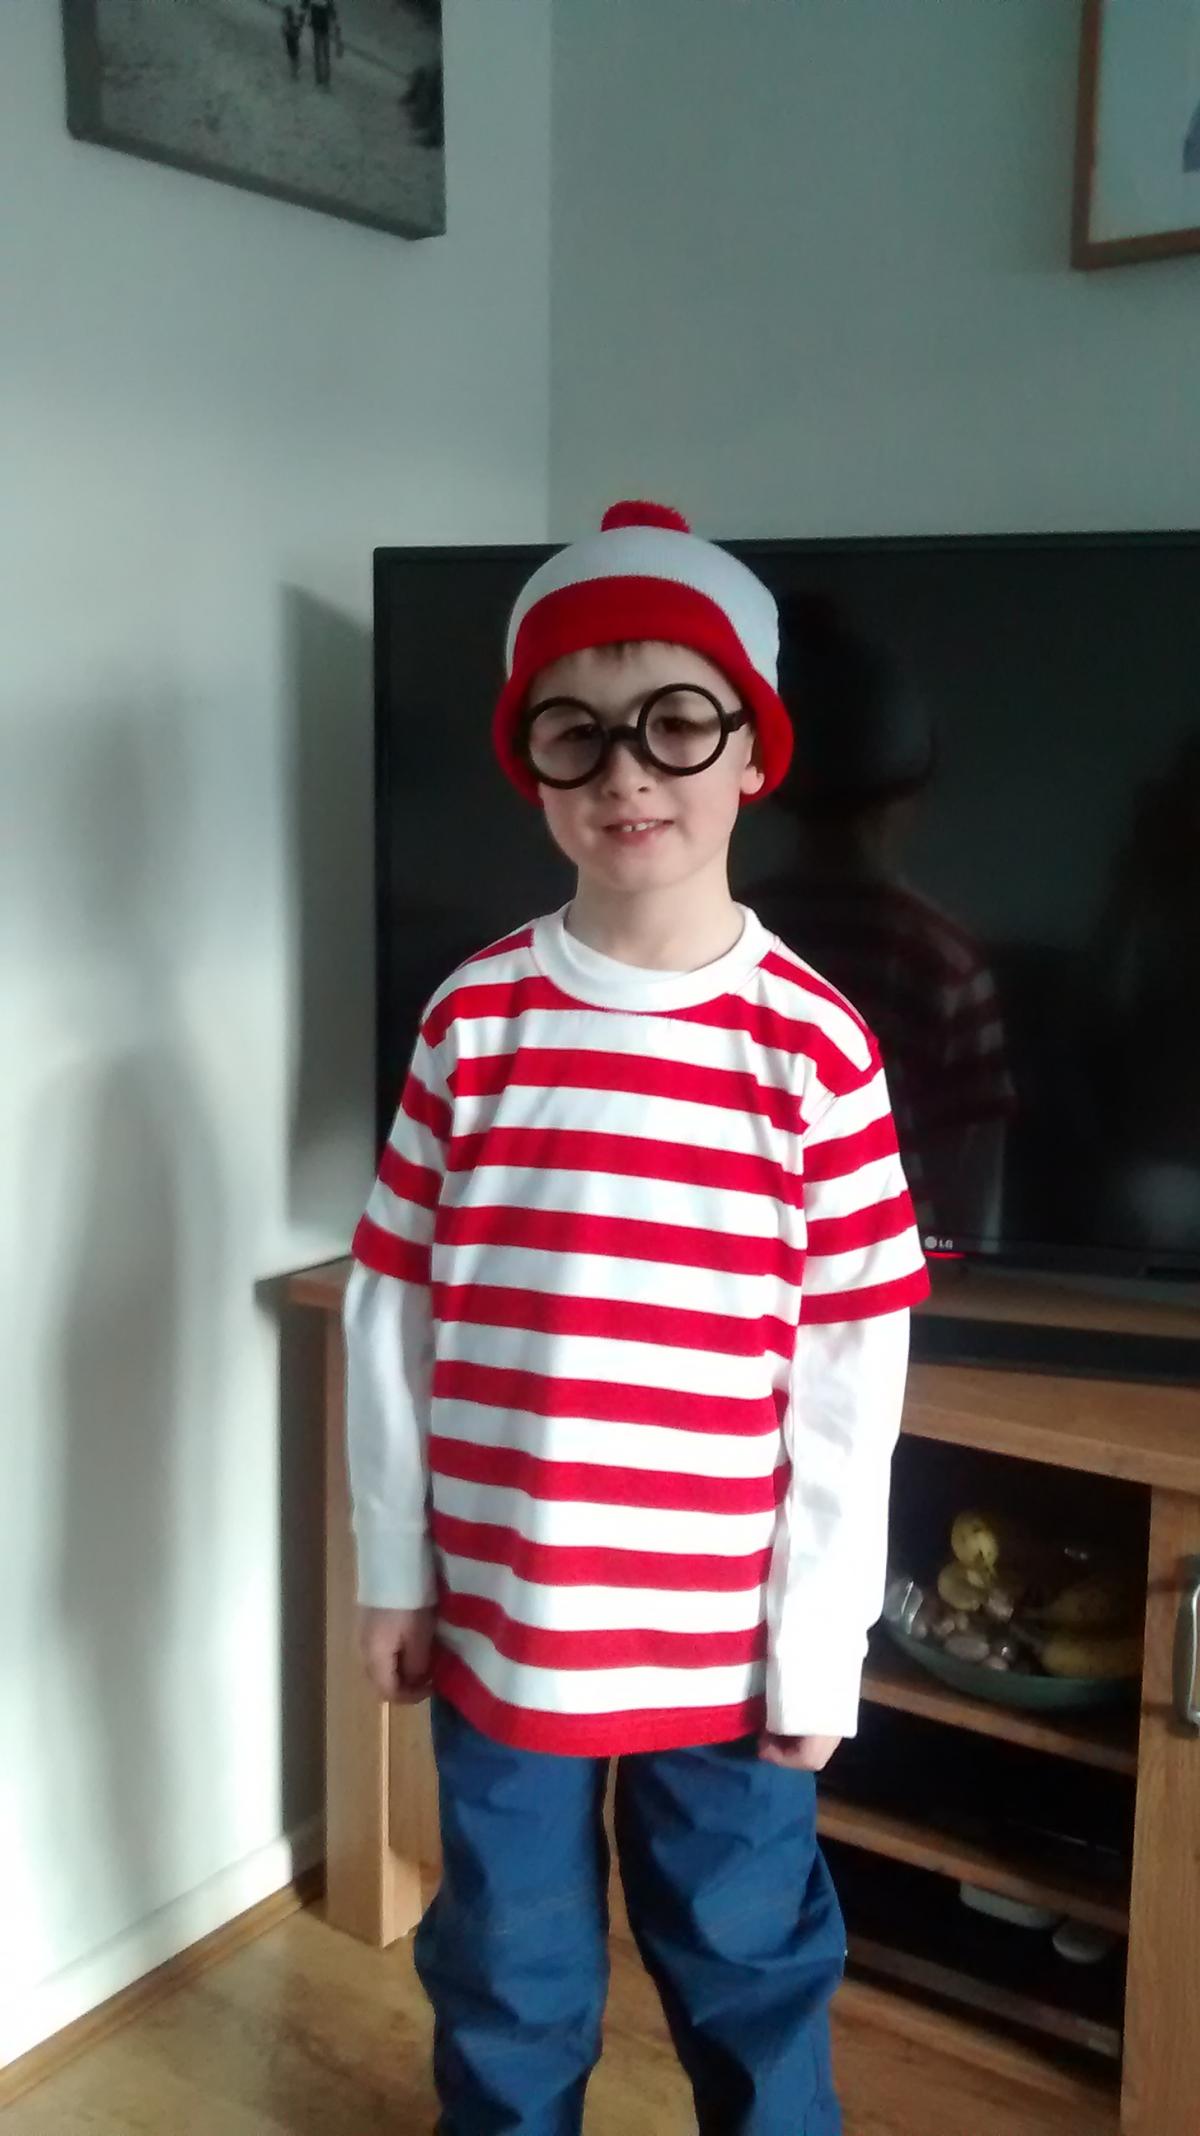 Archie Long from St Wilfrids Catholic Primary (dressed as Where's Wally)